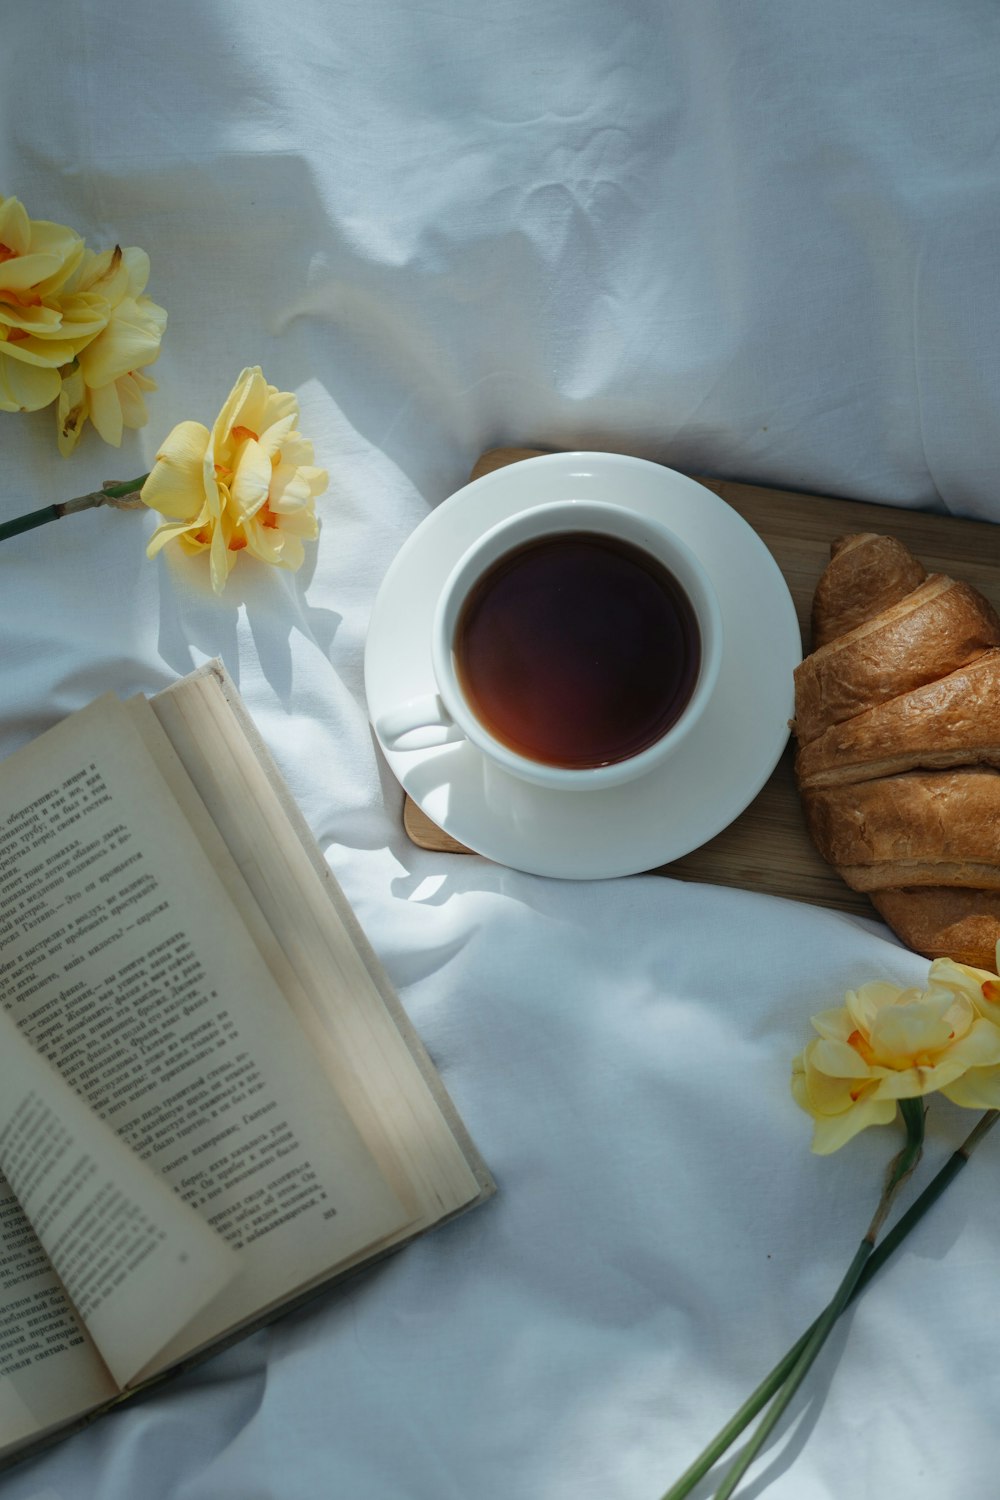 a cup of tea and some croissants on a bed